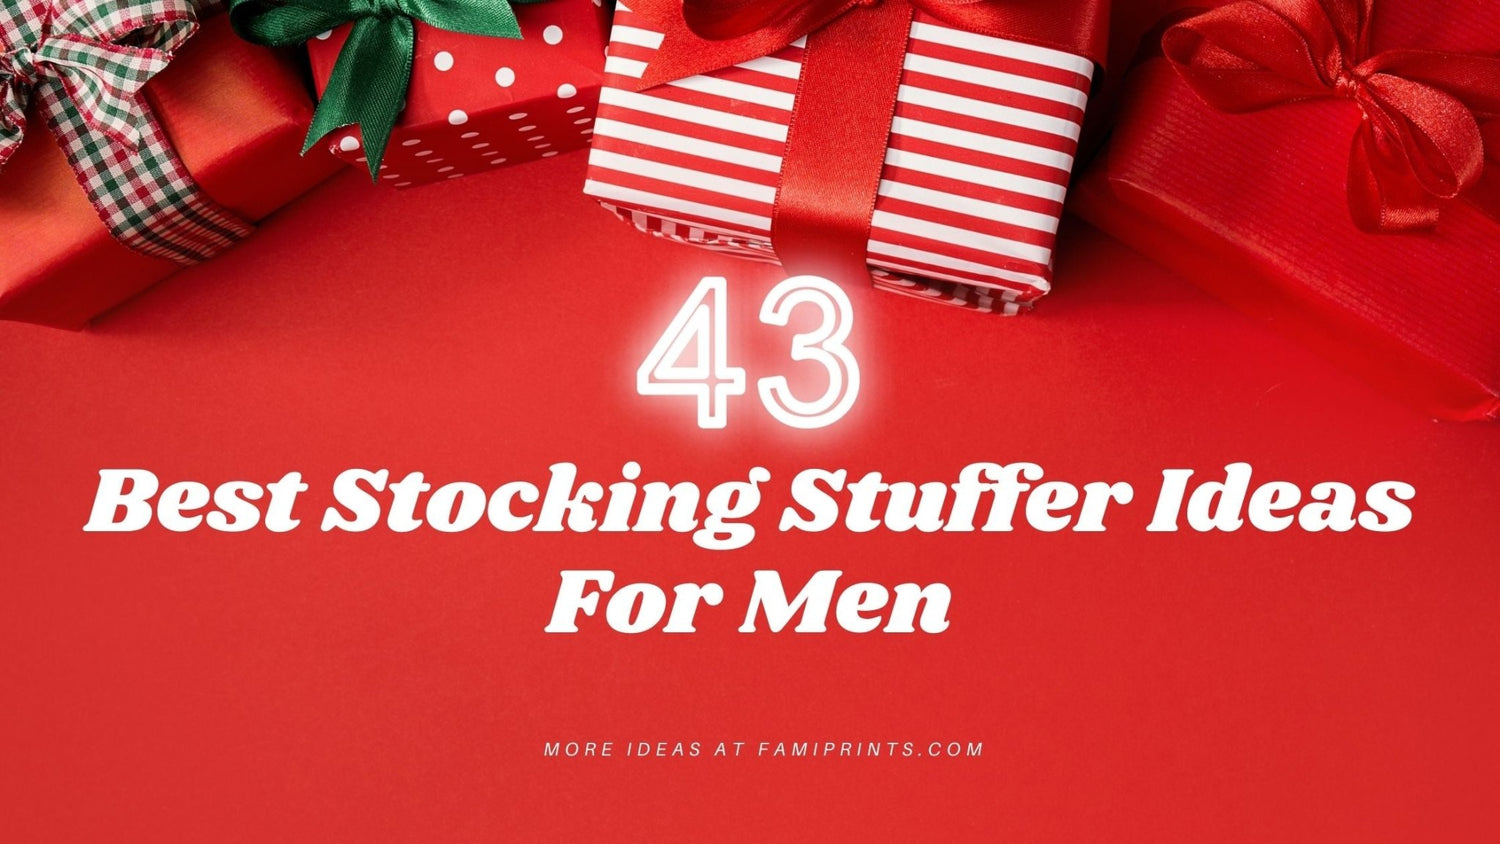 Gifts for Men - Stocking Stuffers for Men 2023 - Best Man Gift Idea for New  Year - Mens Stocking Stuffer Ideas - Christmas Presents for Dad Husband